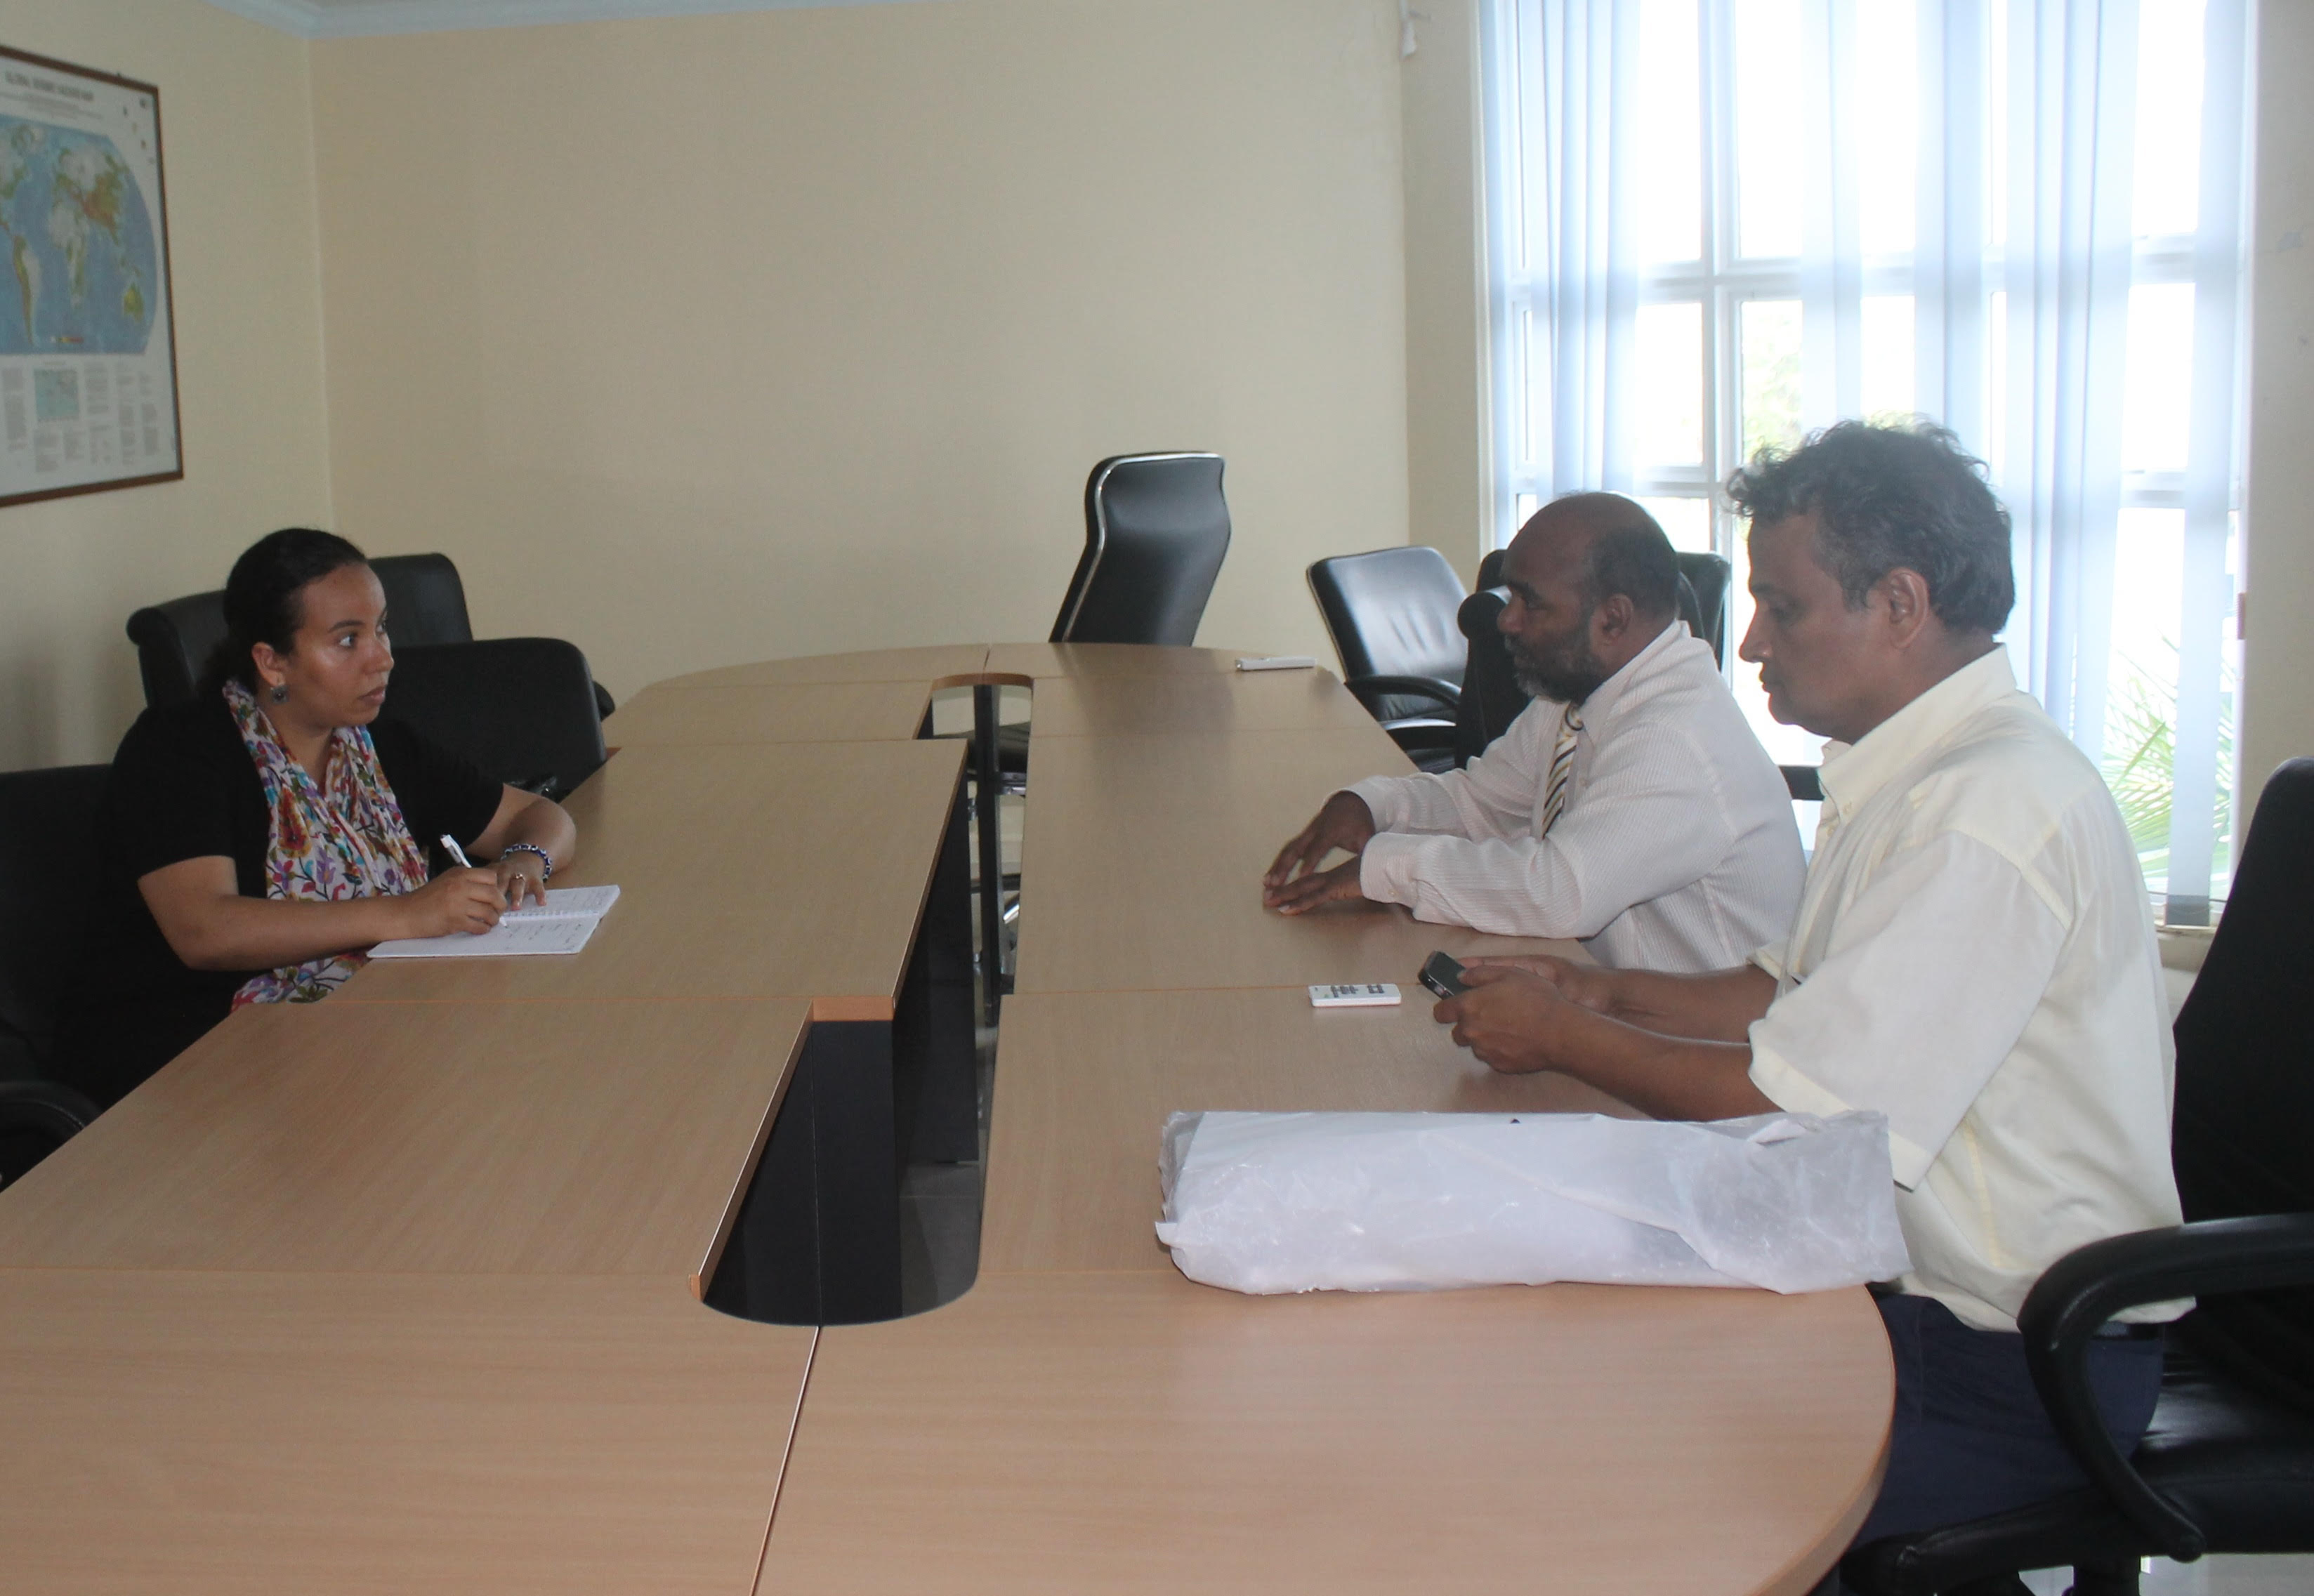  Dr. Lareef Zubair in a discussion at the Maldives Meteorological Service (MMS)